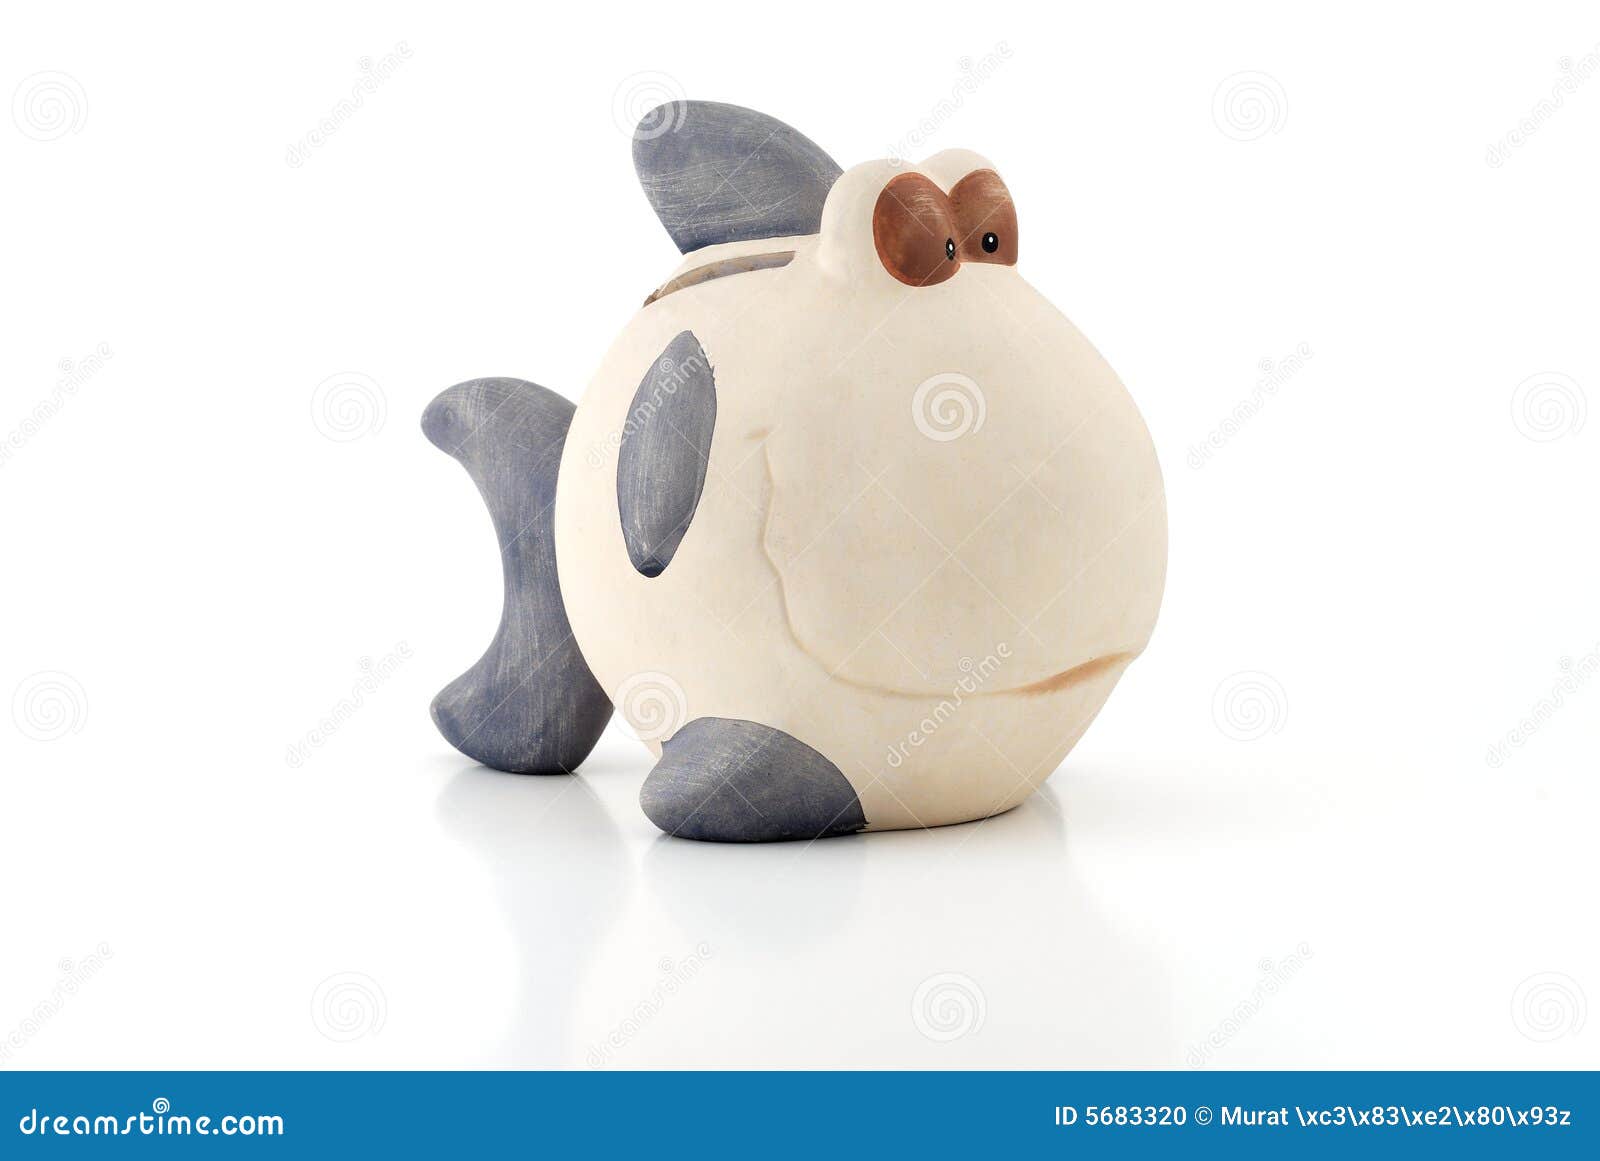 Fish Style Piggy Bank stock photo. Image of coin, currency - 5683320